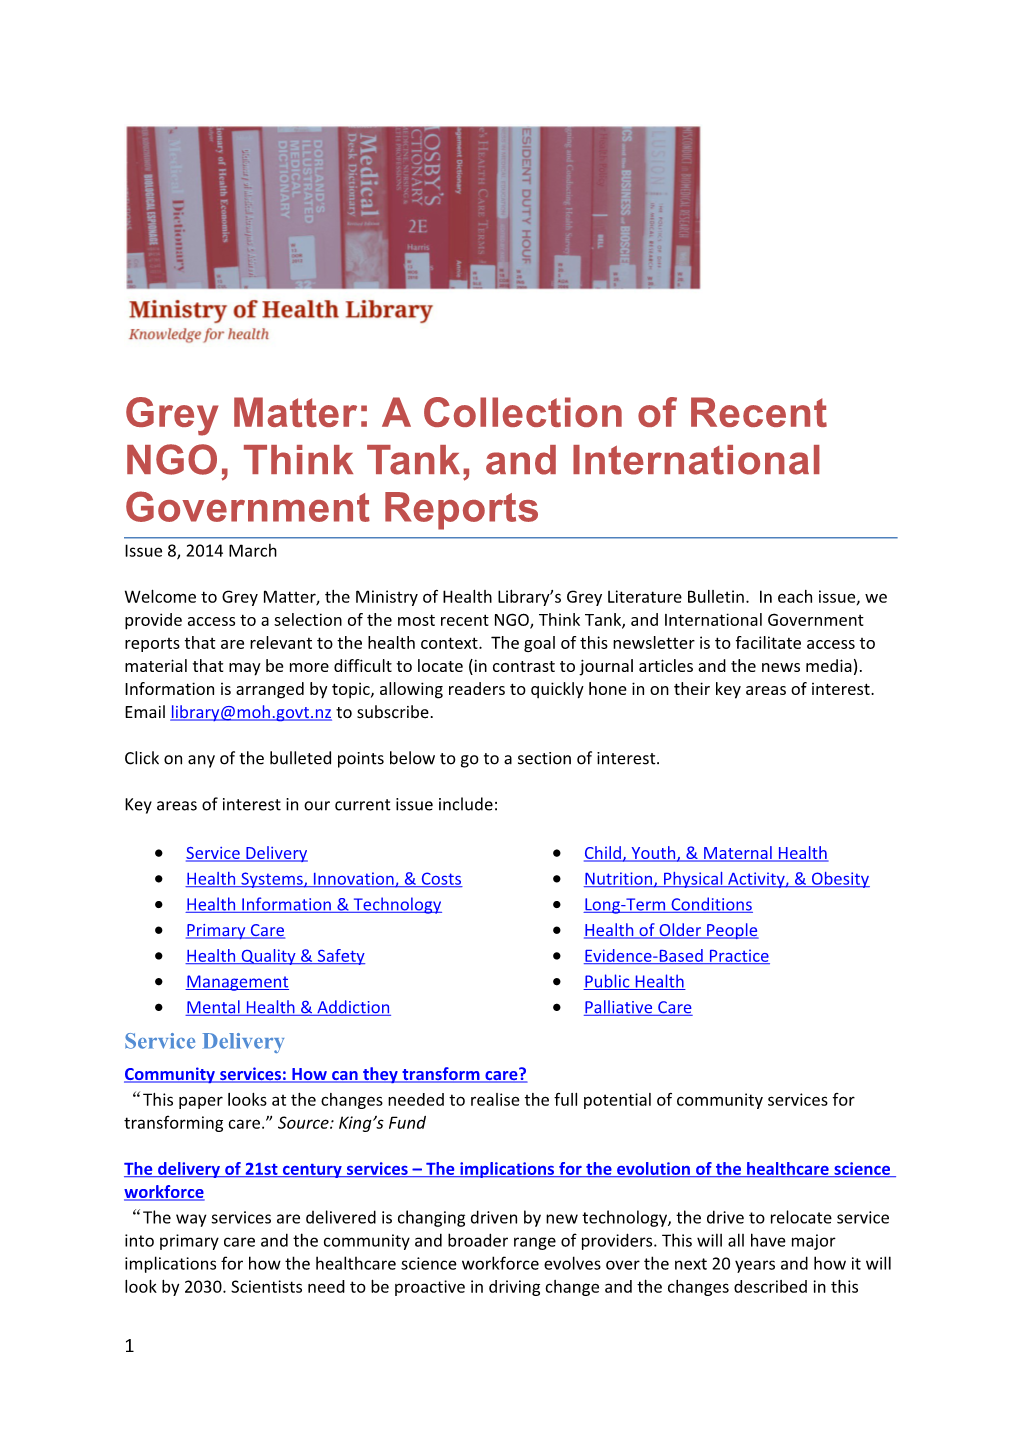 Grey Matter, Issue 7, February 2014 s1